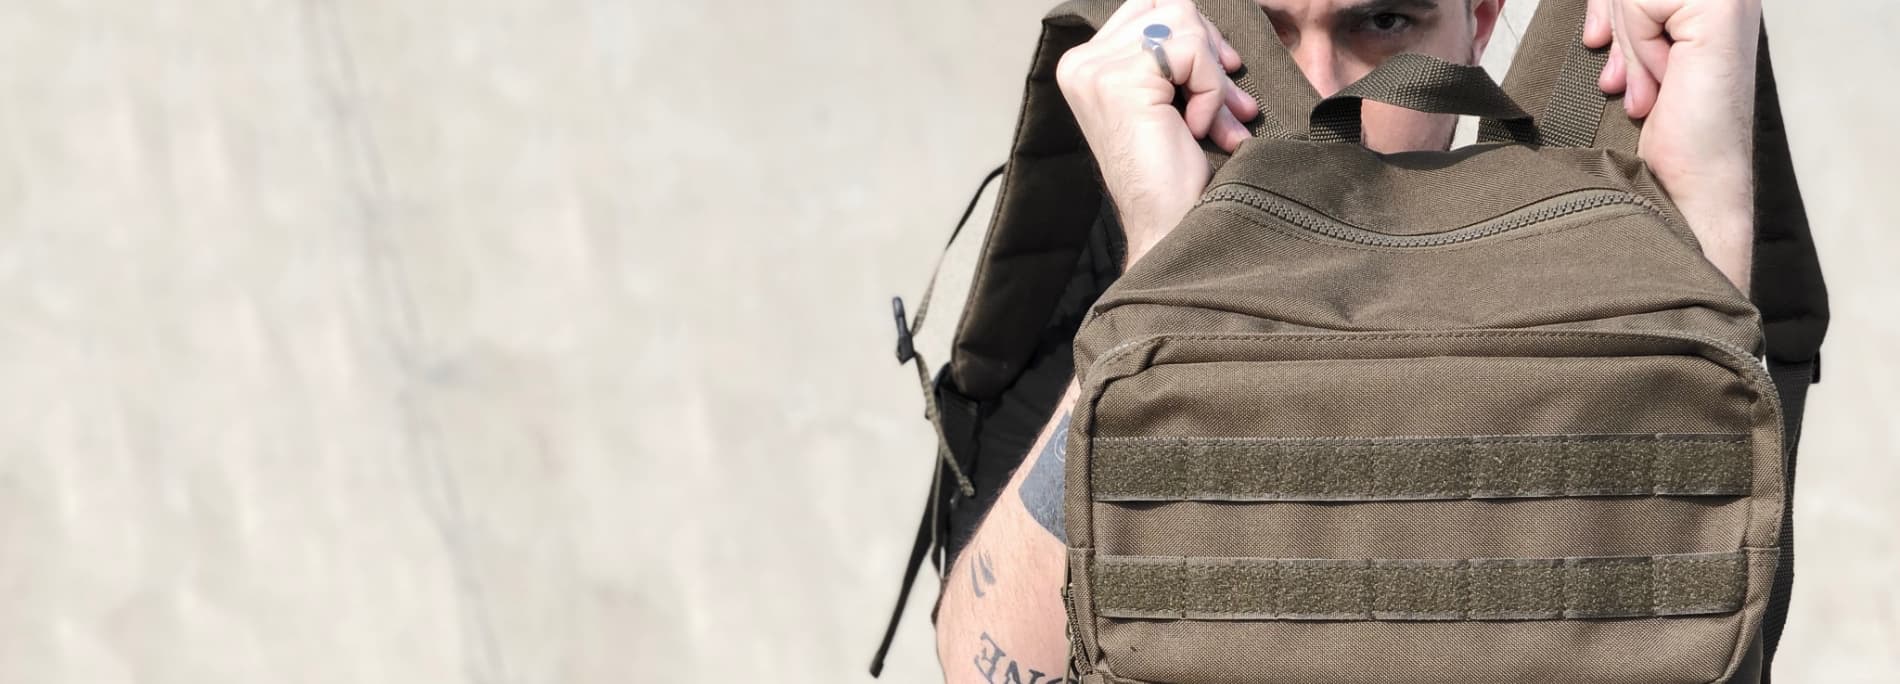 Model holding the Tactical Bag in military green